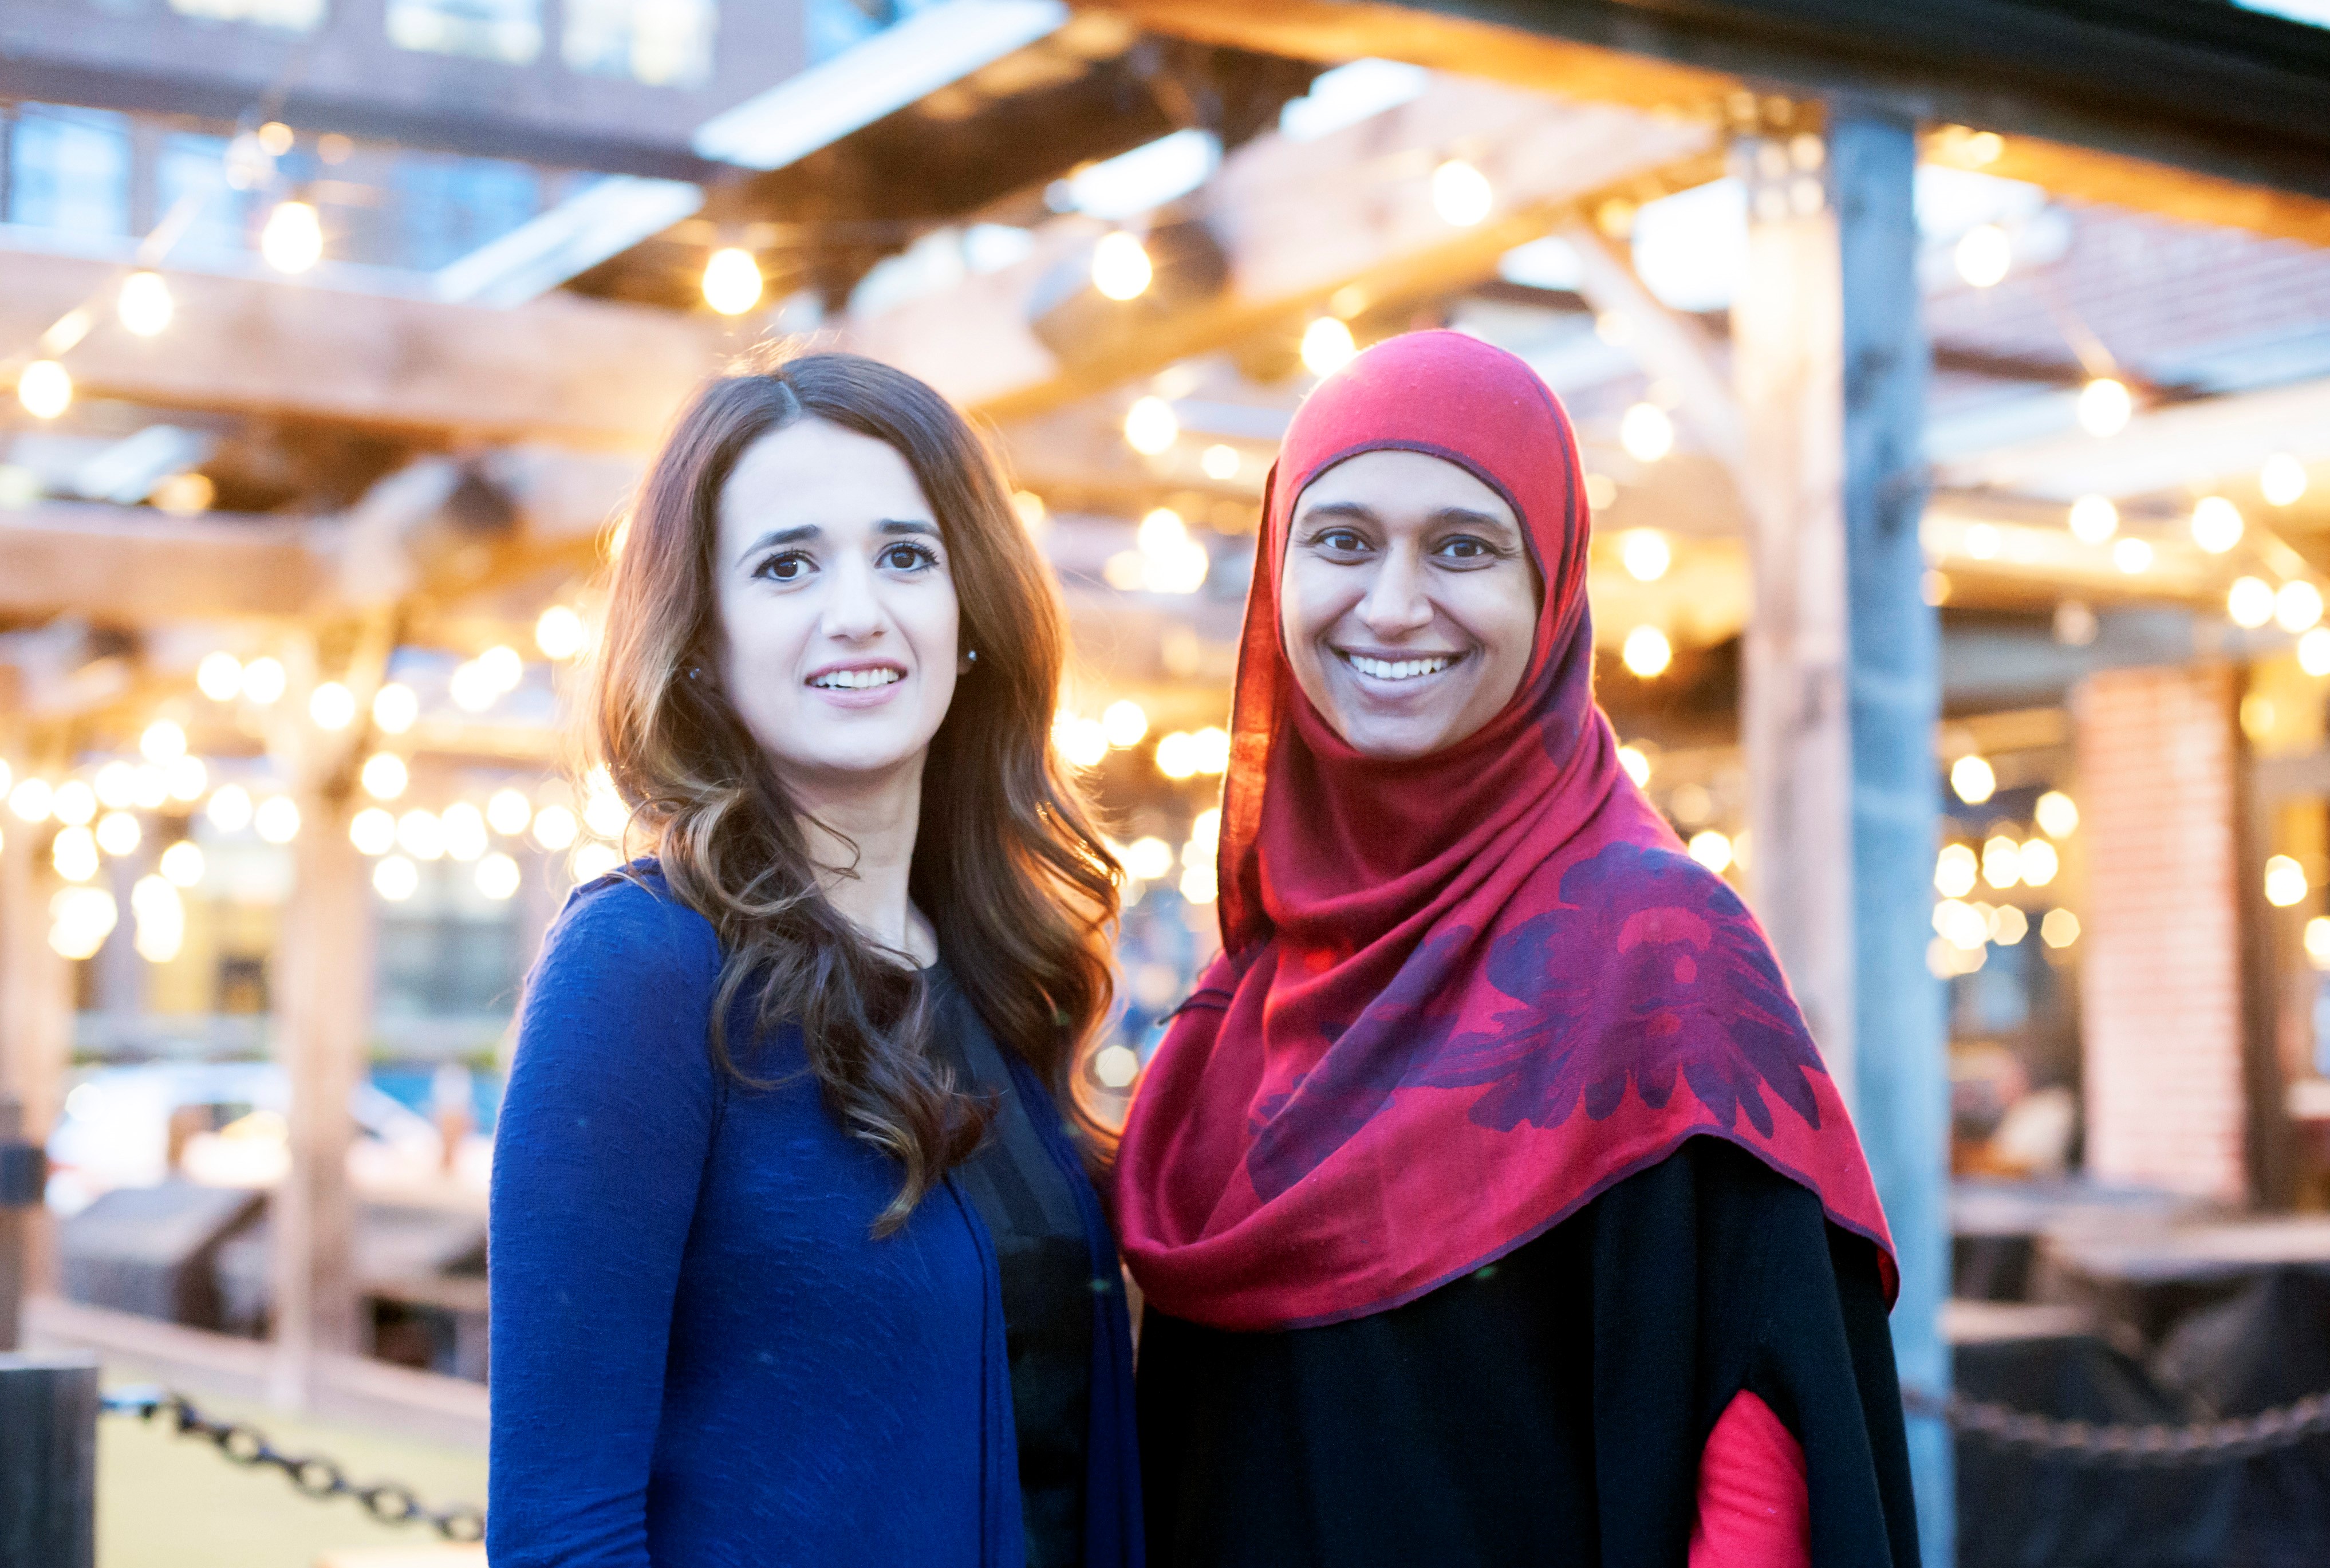 Canadian women create offline dating service for Muslims looking for love 